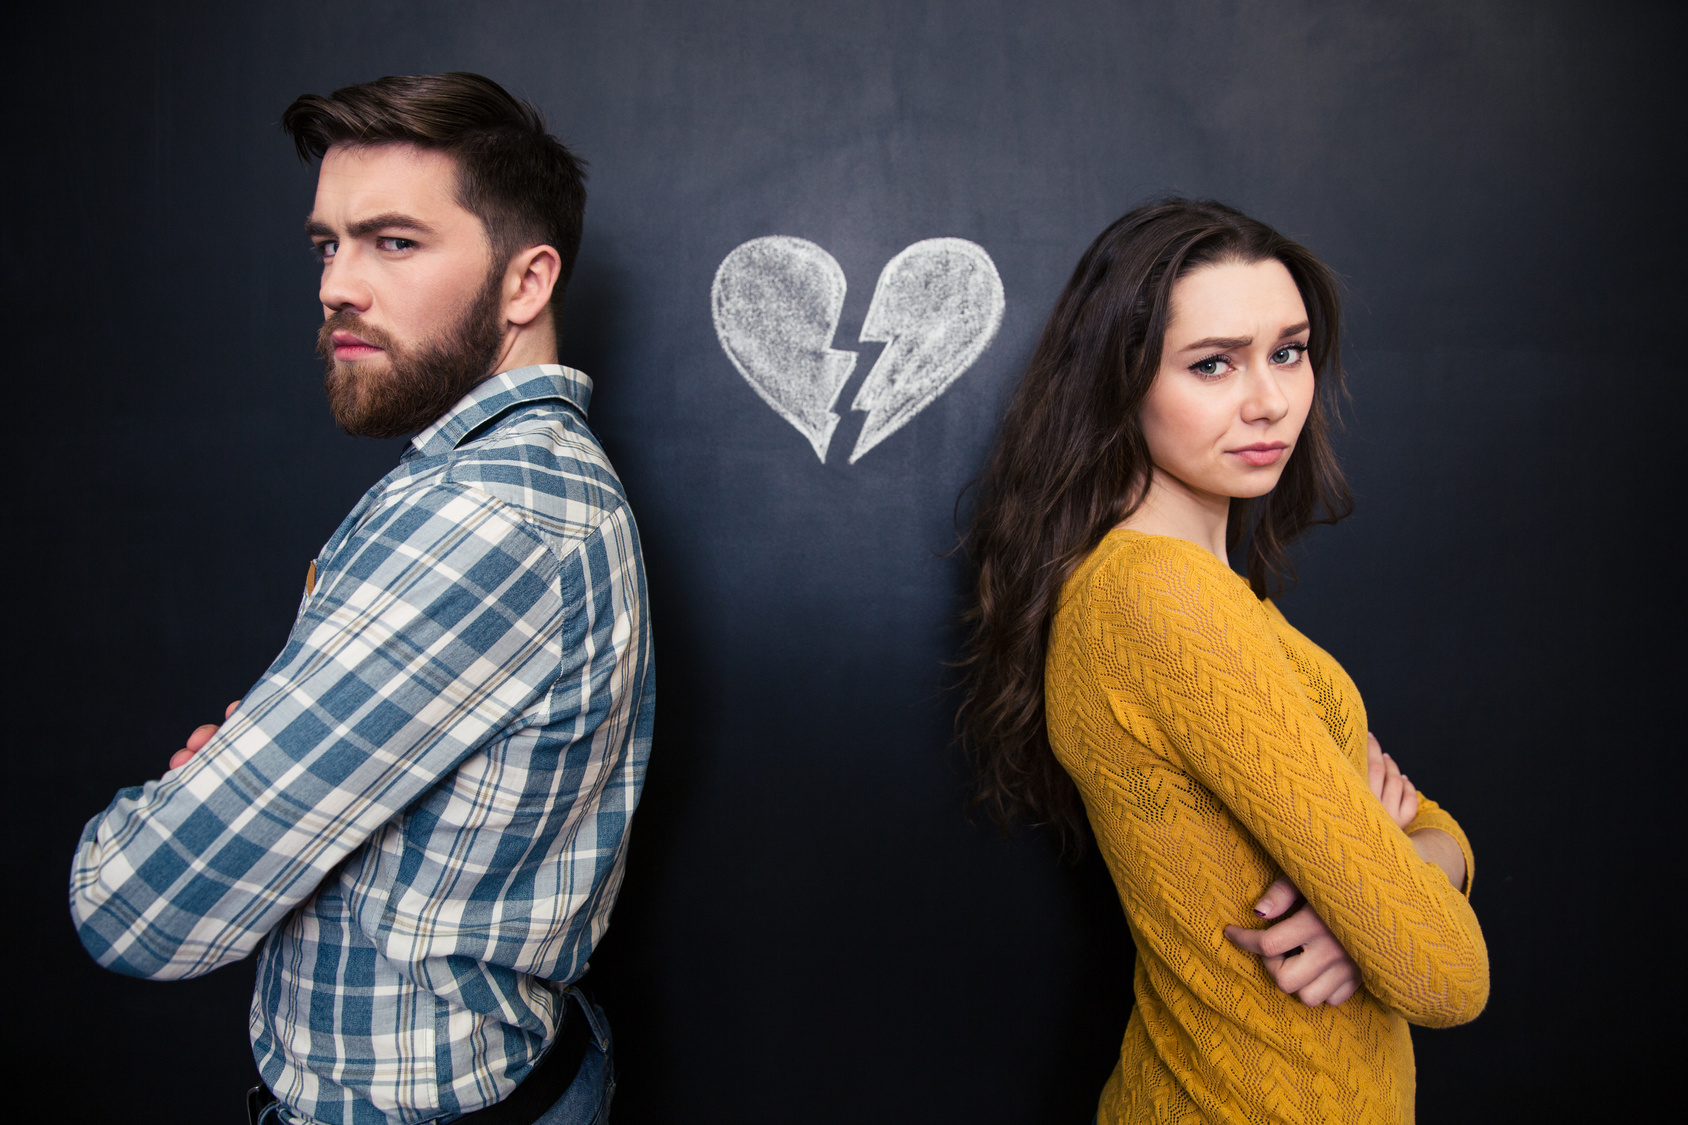 Unhappy couple standing over chalkboard background with drawn broken heart